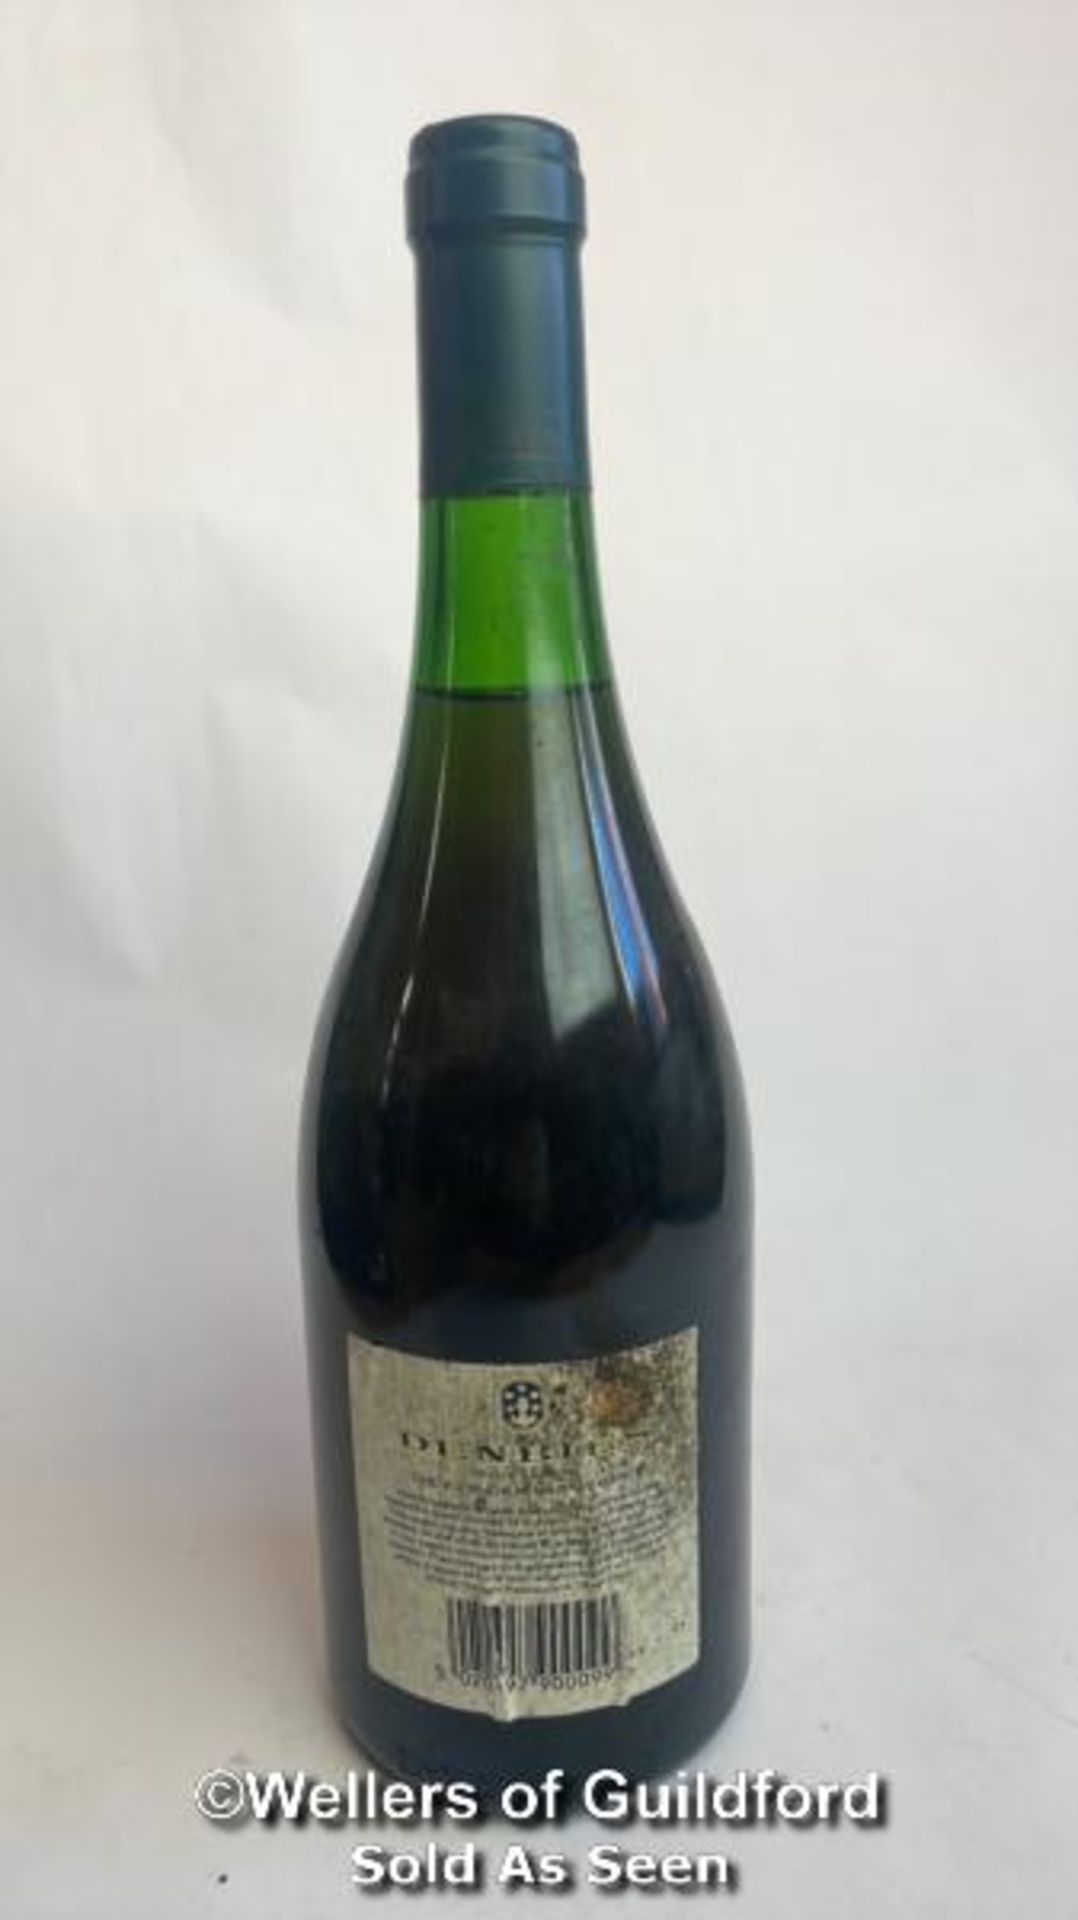 1992 Denbies Pino Gris, 75cl, 10.5% vol / Please see images for fill level and general condition. - Bild 3 aus 5